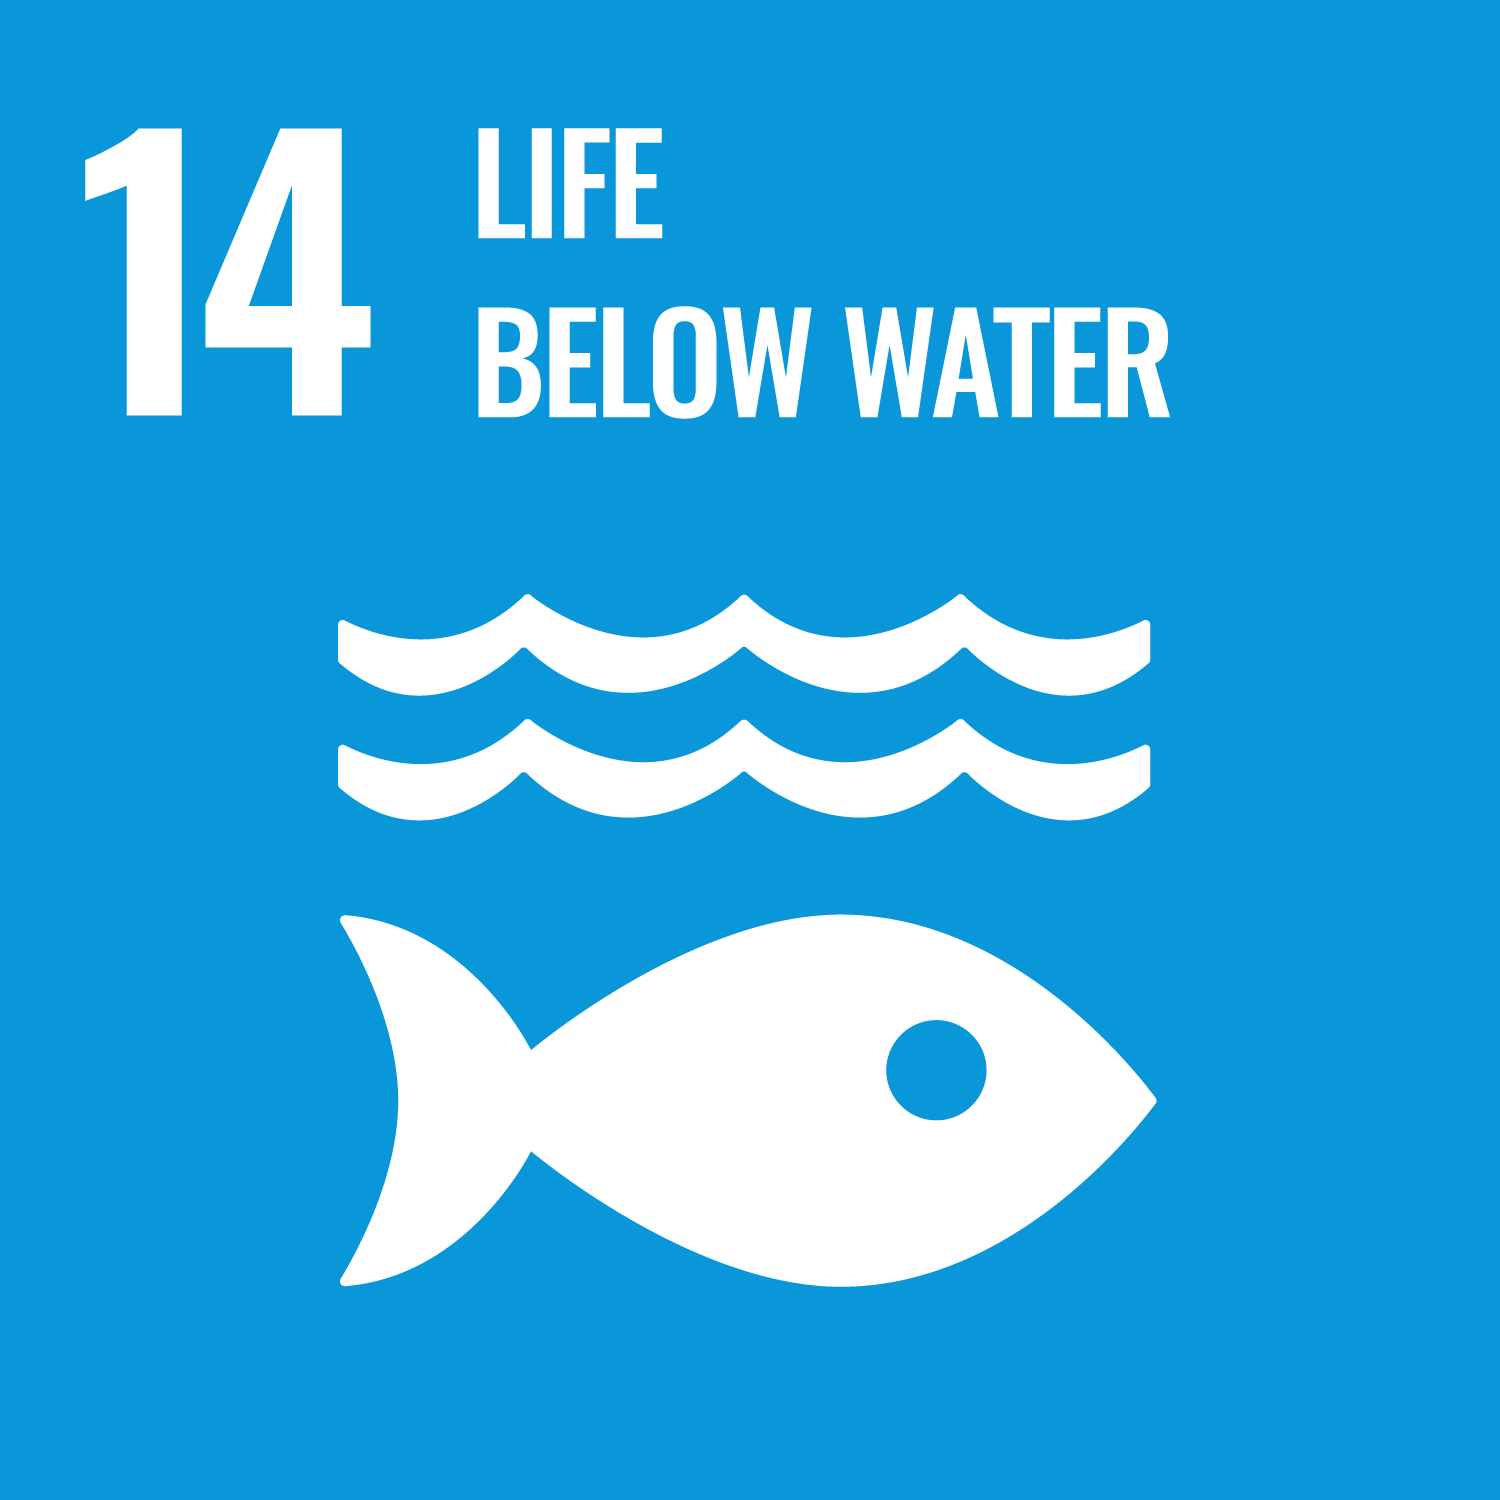 United Nation's 17 Sustainable Development Goals: Goal Number 14: Life Below Water